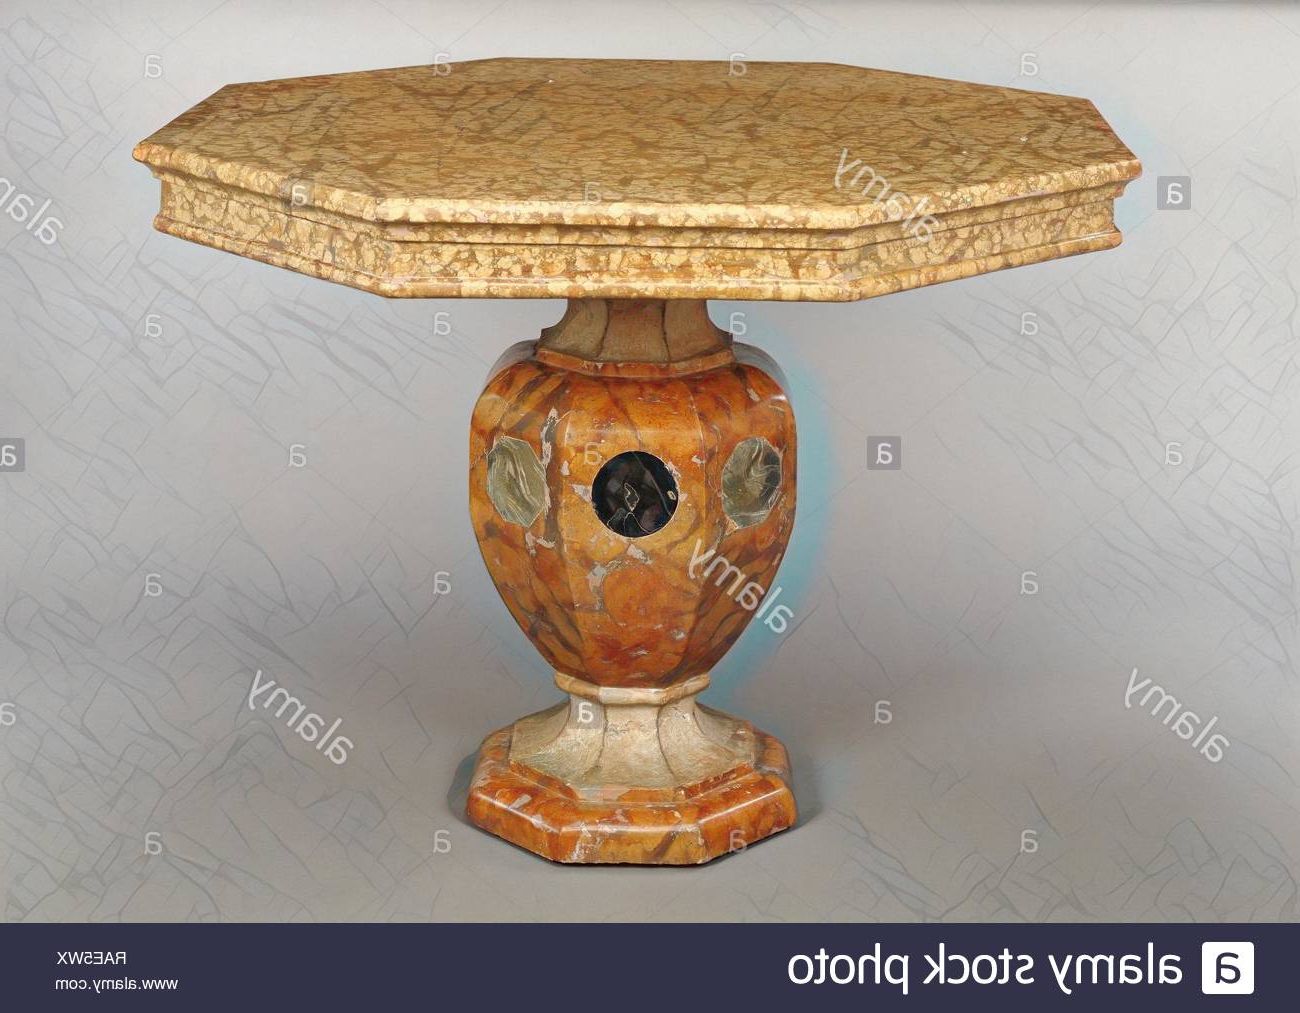 Popular Rae Round Pedestal Dining Tables Pertaining To Octagonal Table Stock Photos & Octagonal Table Stock Images (View 20 of 25)